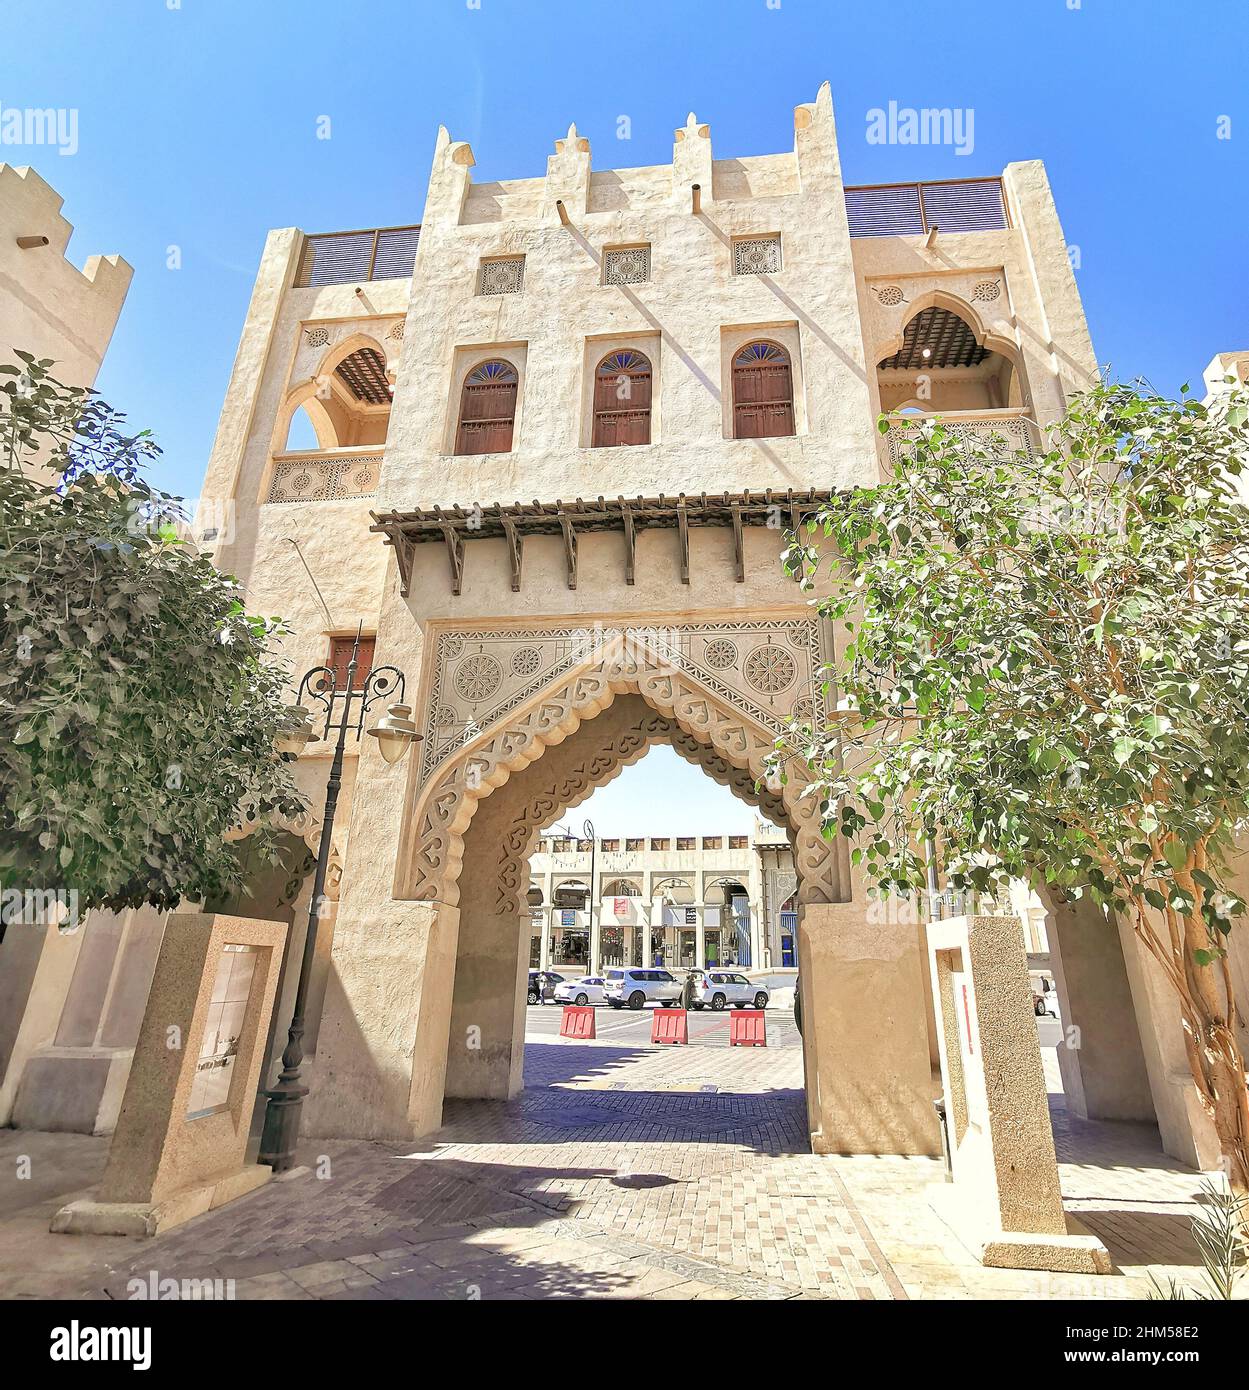 HOFUF, SAUDI ARABIA - February 2nd, 2021: The Qaisariah Souq is a cultural attraction, well-preserved to reflect the spirit of ancient times, Arabic a Stock Photo